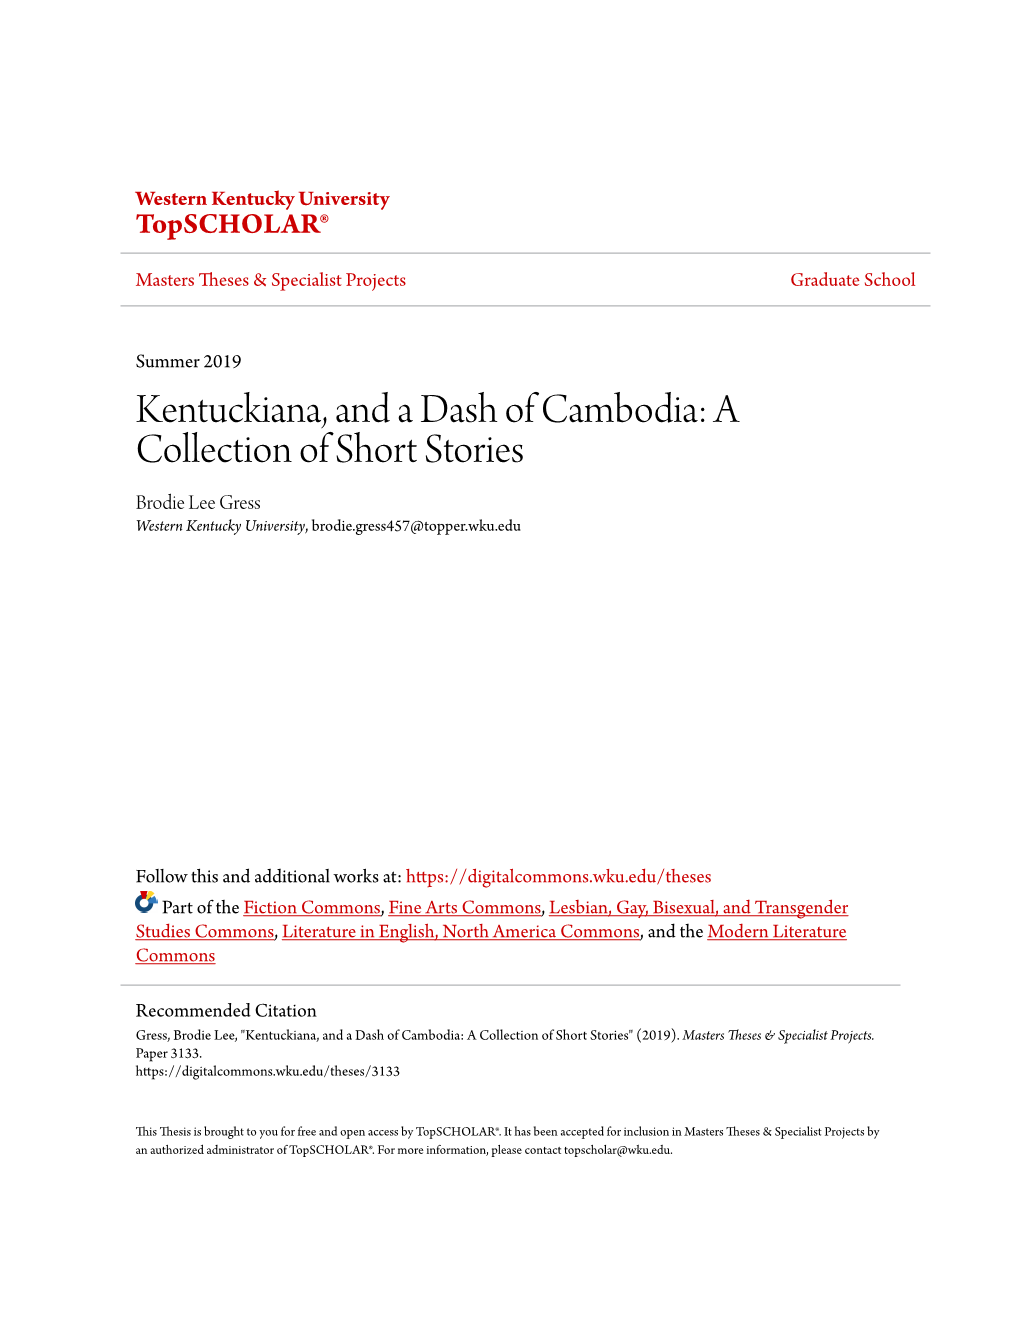 Kentuckiana, and a Dash of Cambodia: a Collection of Short Stories Brodie Lee Gress Western Kentucky University, Brodie.Gress457@Topper.Wku.Edu